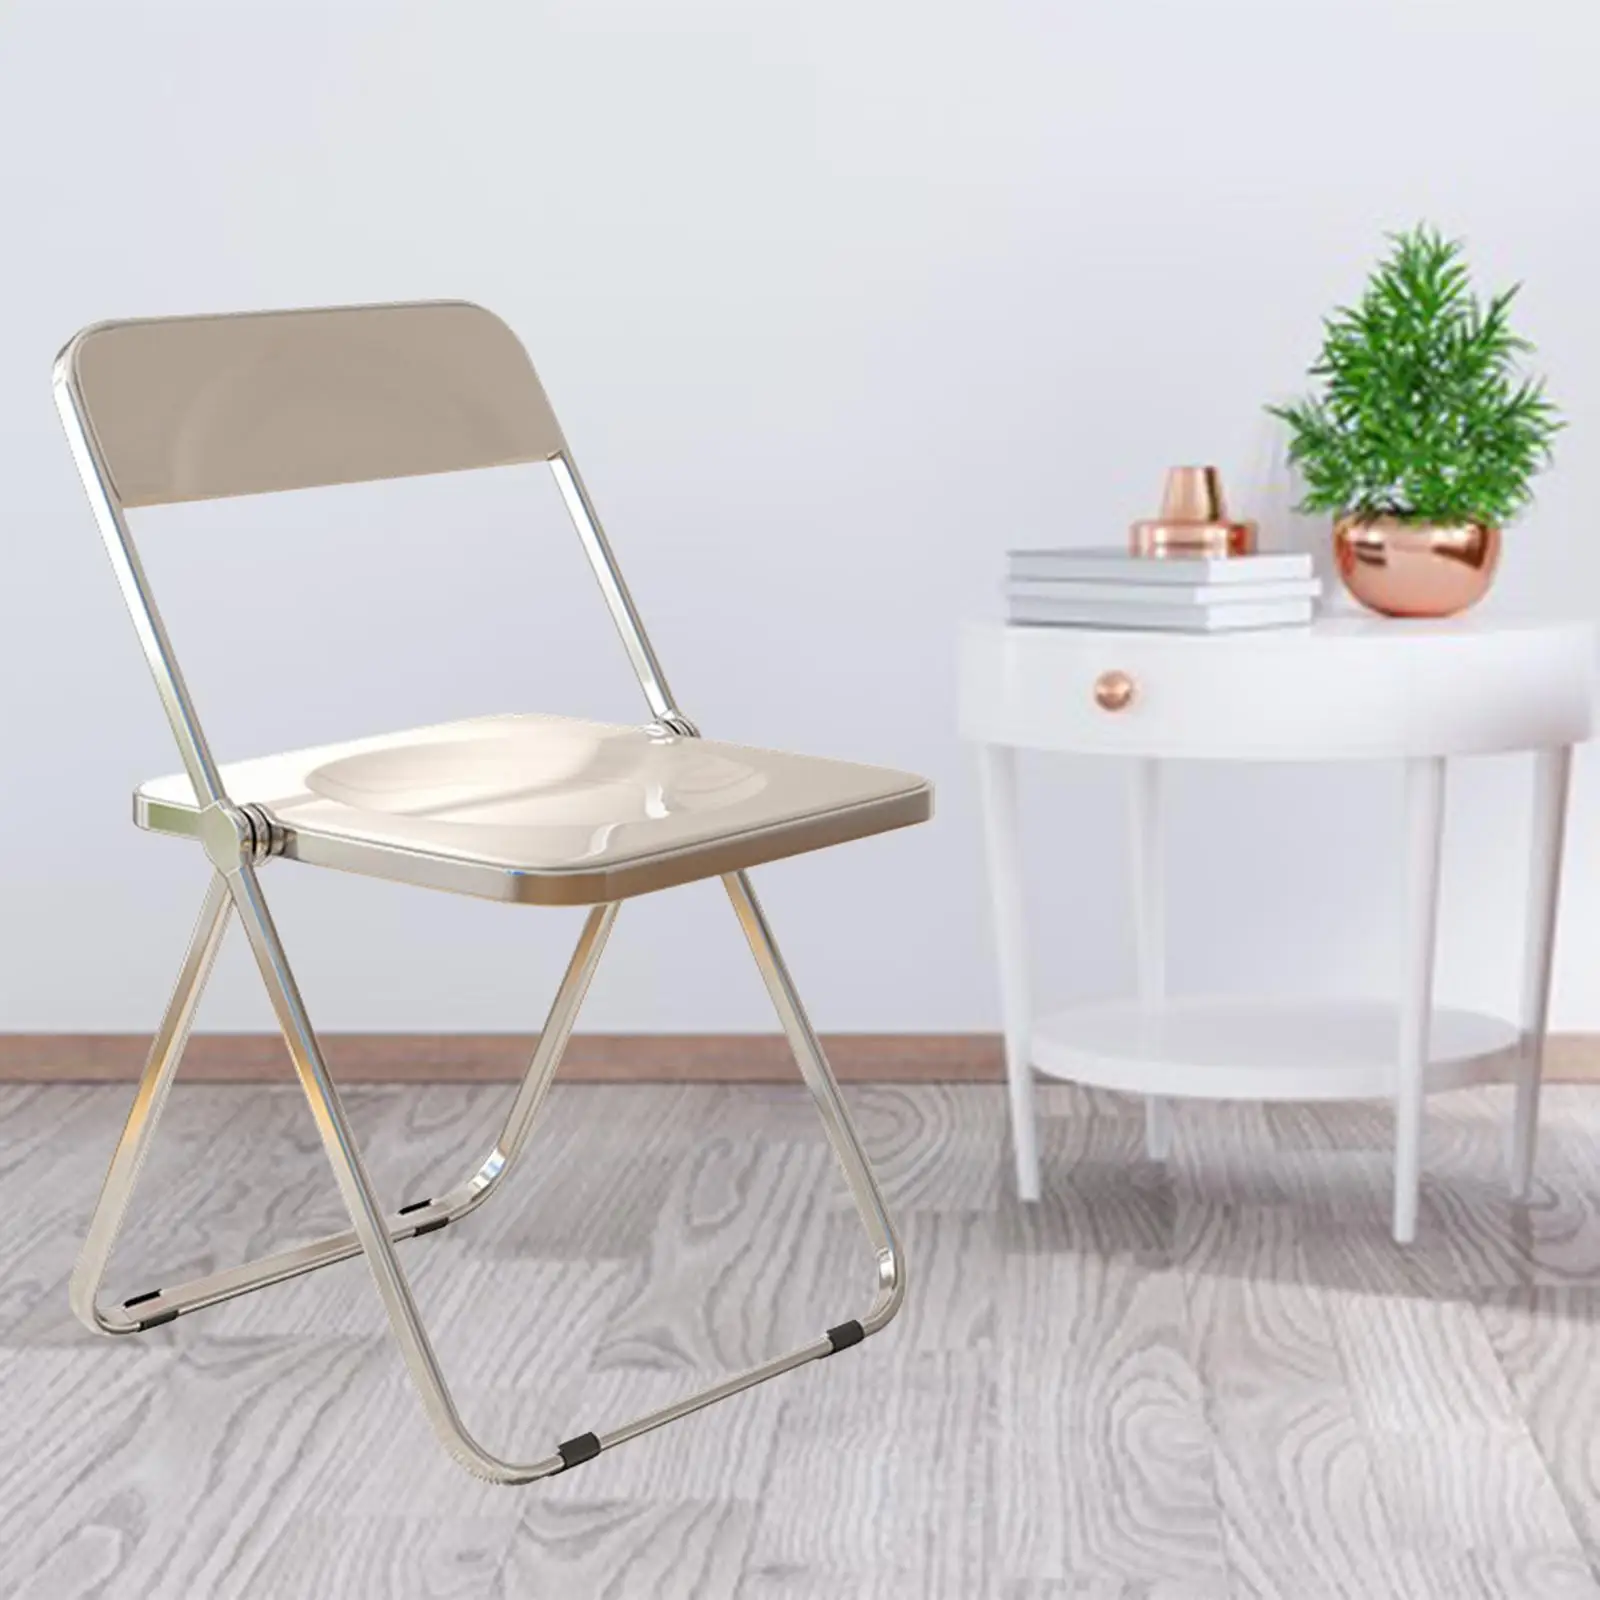 Acrylic Folding Chair Steel Frame Furniture Clothing Store Photo Chair Makeup Chair for inside Dining Room Office Home